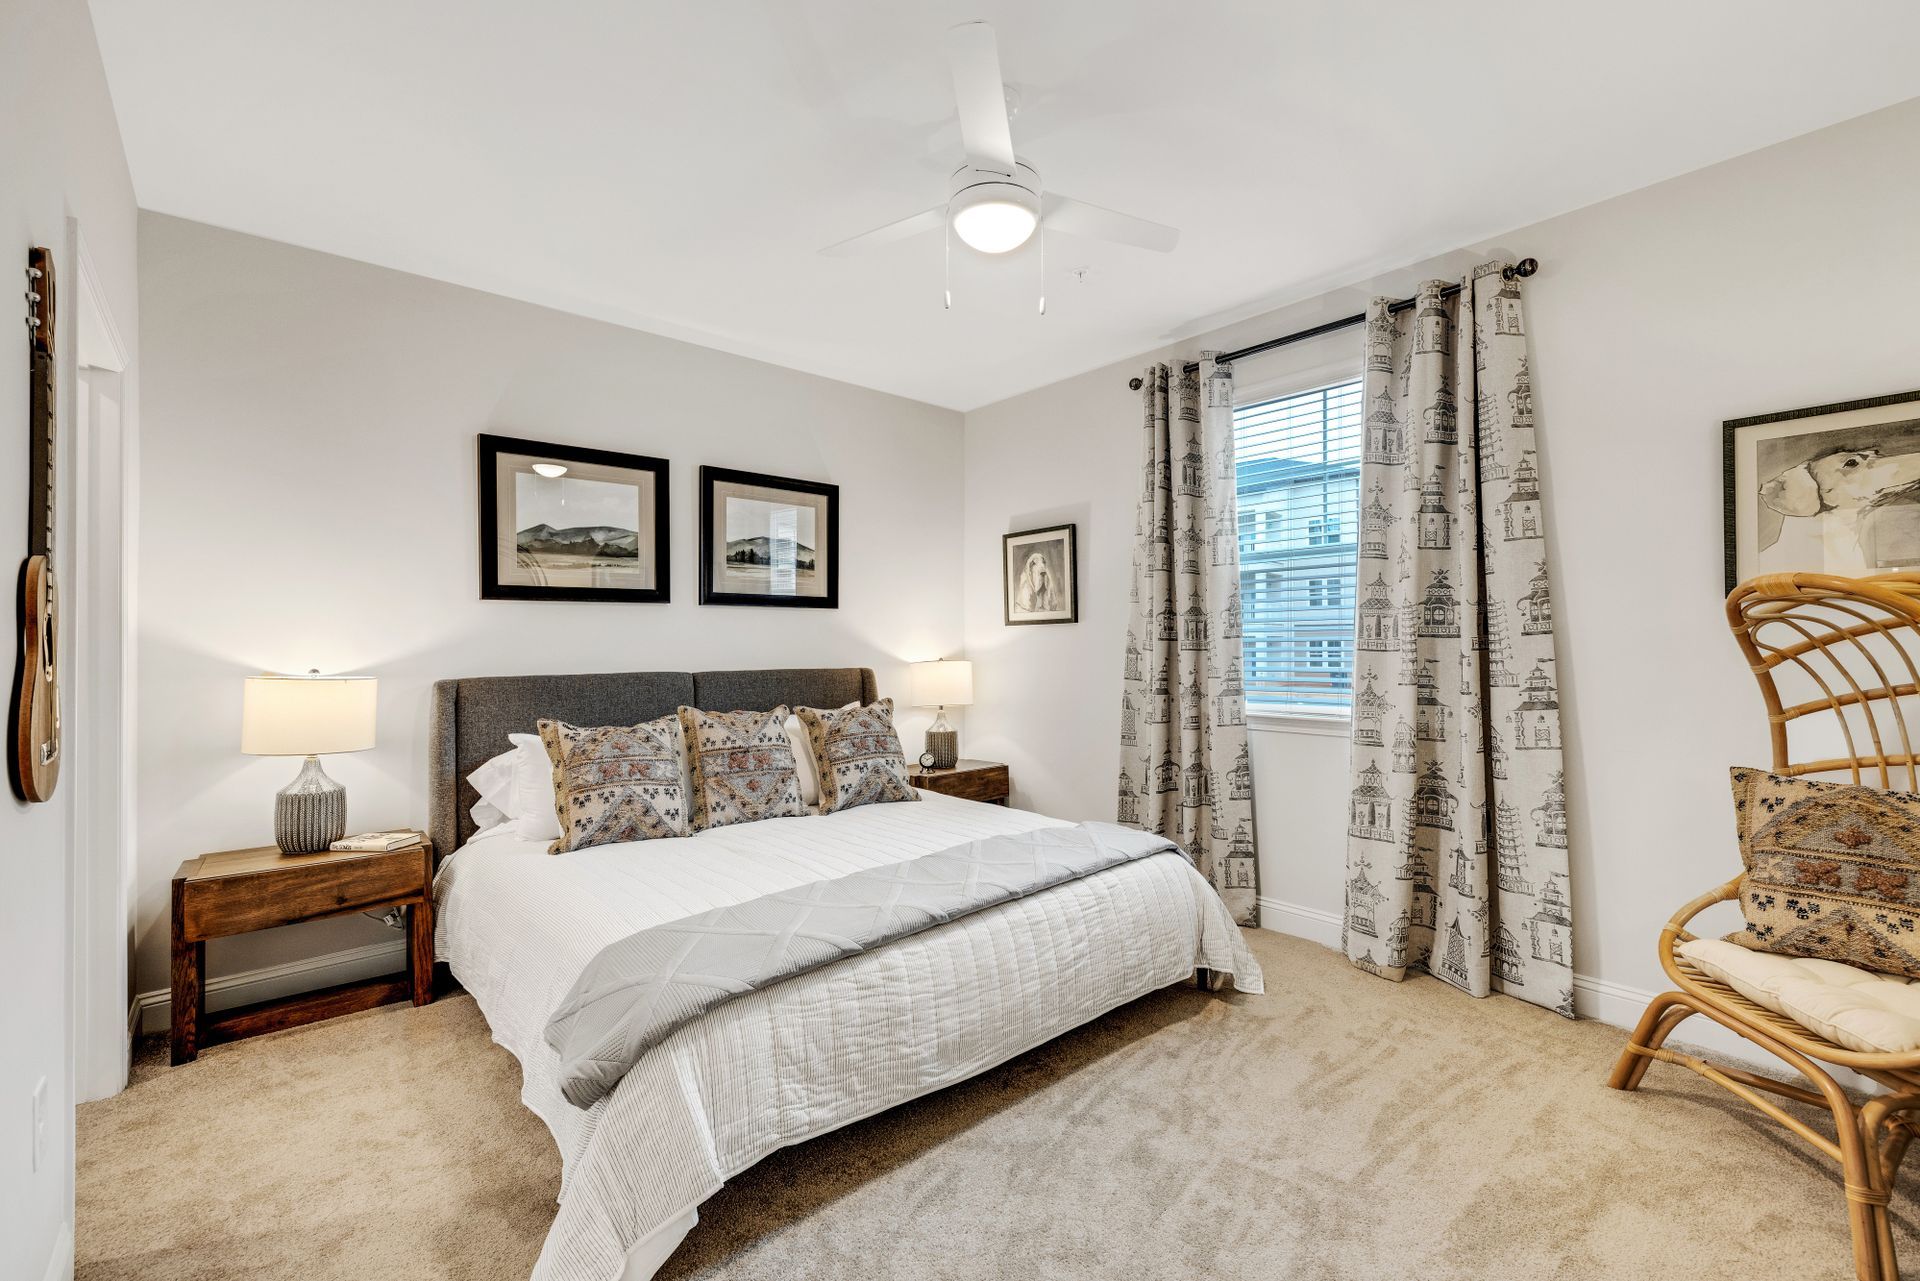 A bedroom with a bed , nightstand , chair and ceiling fan at The Standard at Pinestone. 